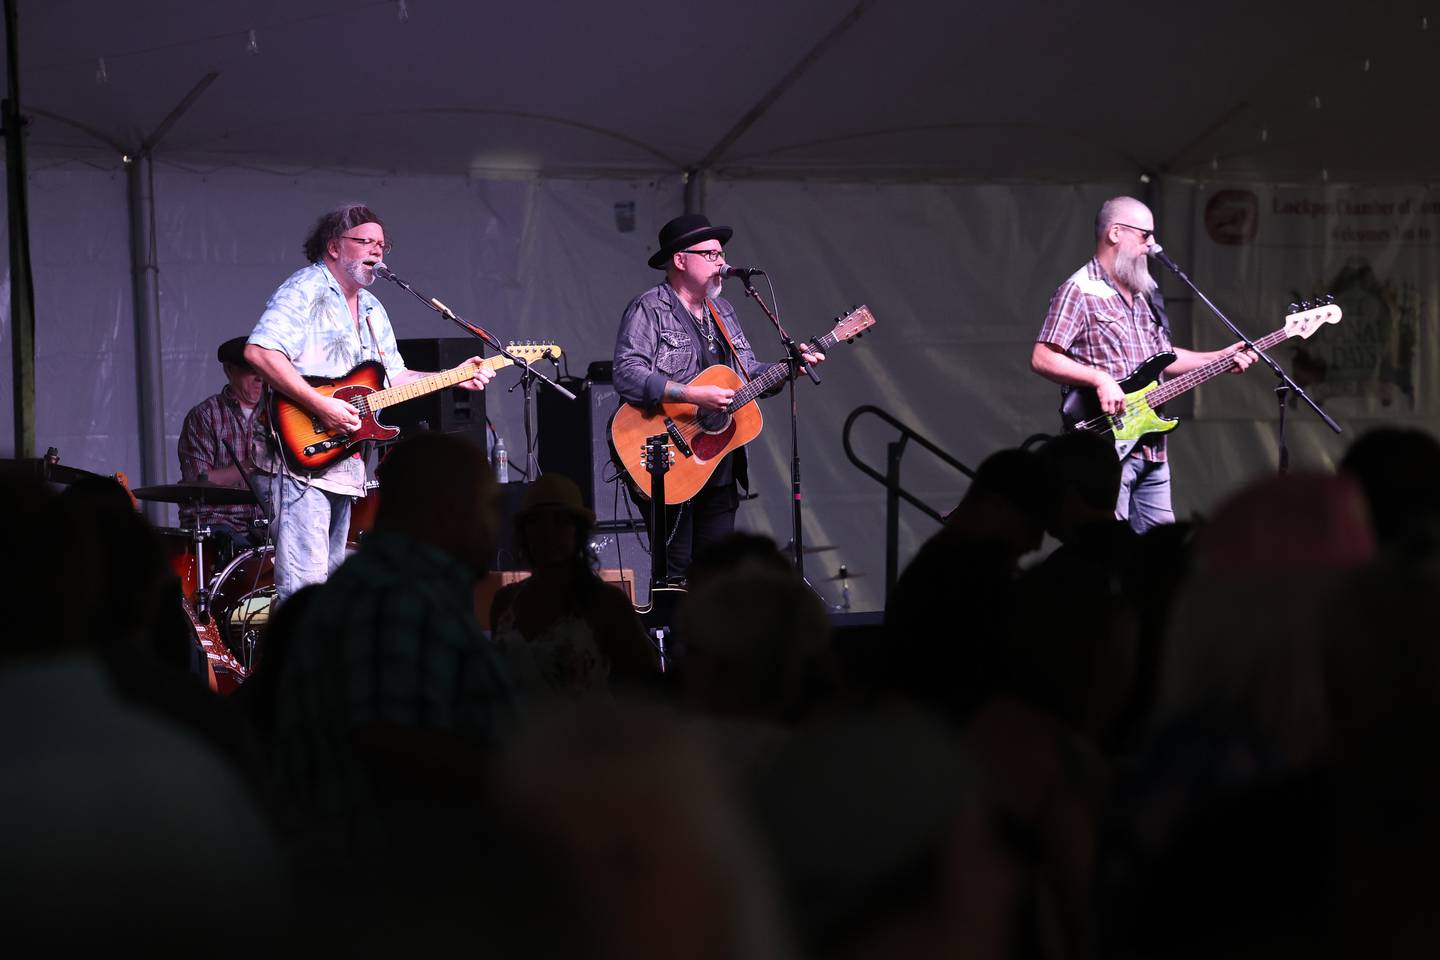 Hundreds pack the Beer Garden tent for live music at Lockport’s Canal Days on Friday, June 9, 2023.